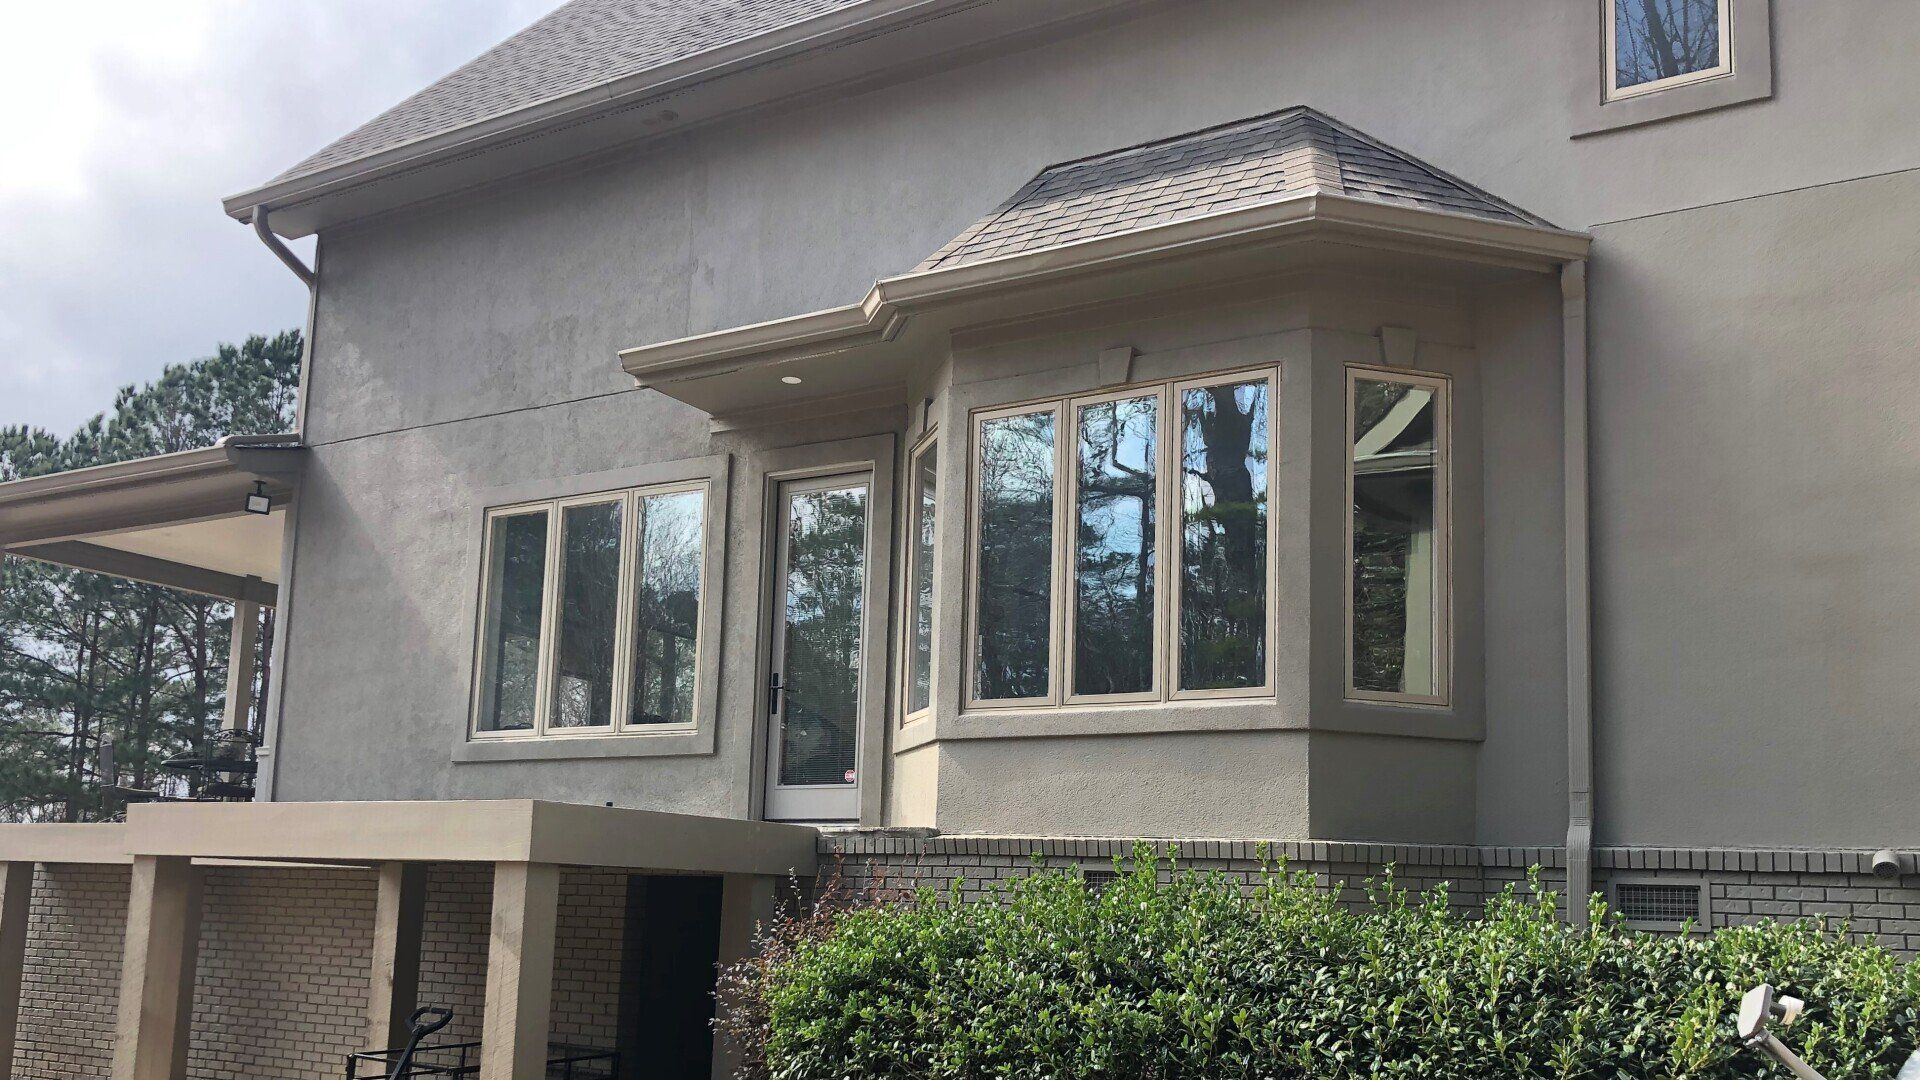 Home window tinting in Alexander City AL - SPF Crystal Clear Residential Tint Created High Clarity Inside, while preserving all floors and fabrics from UV Sun Fade. Alex City, AL